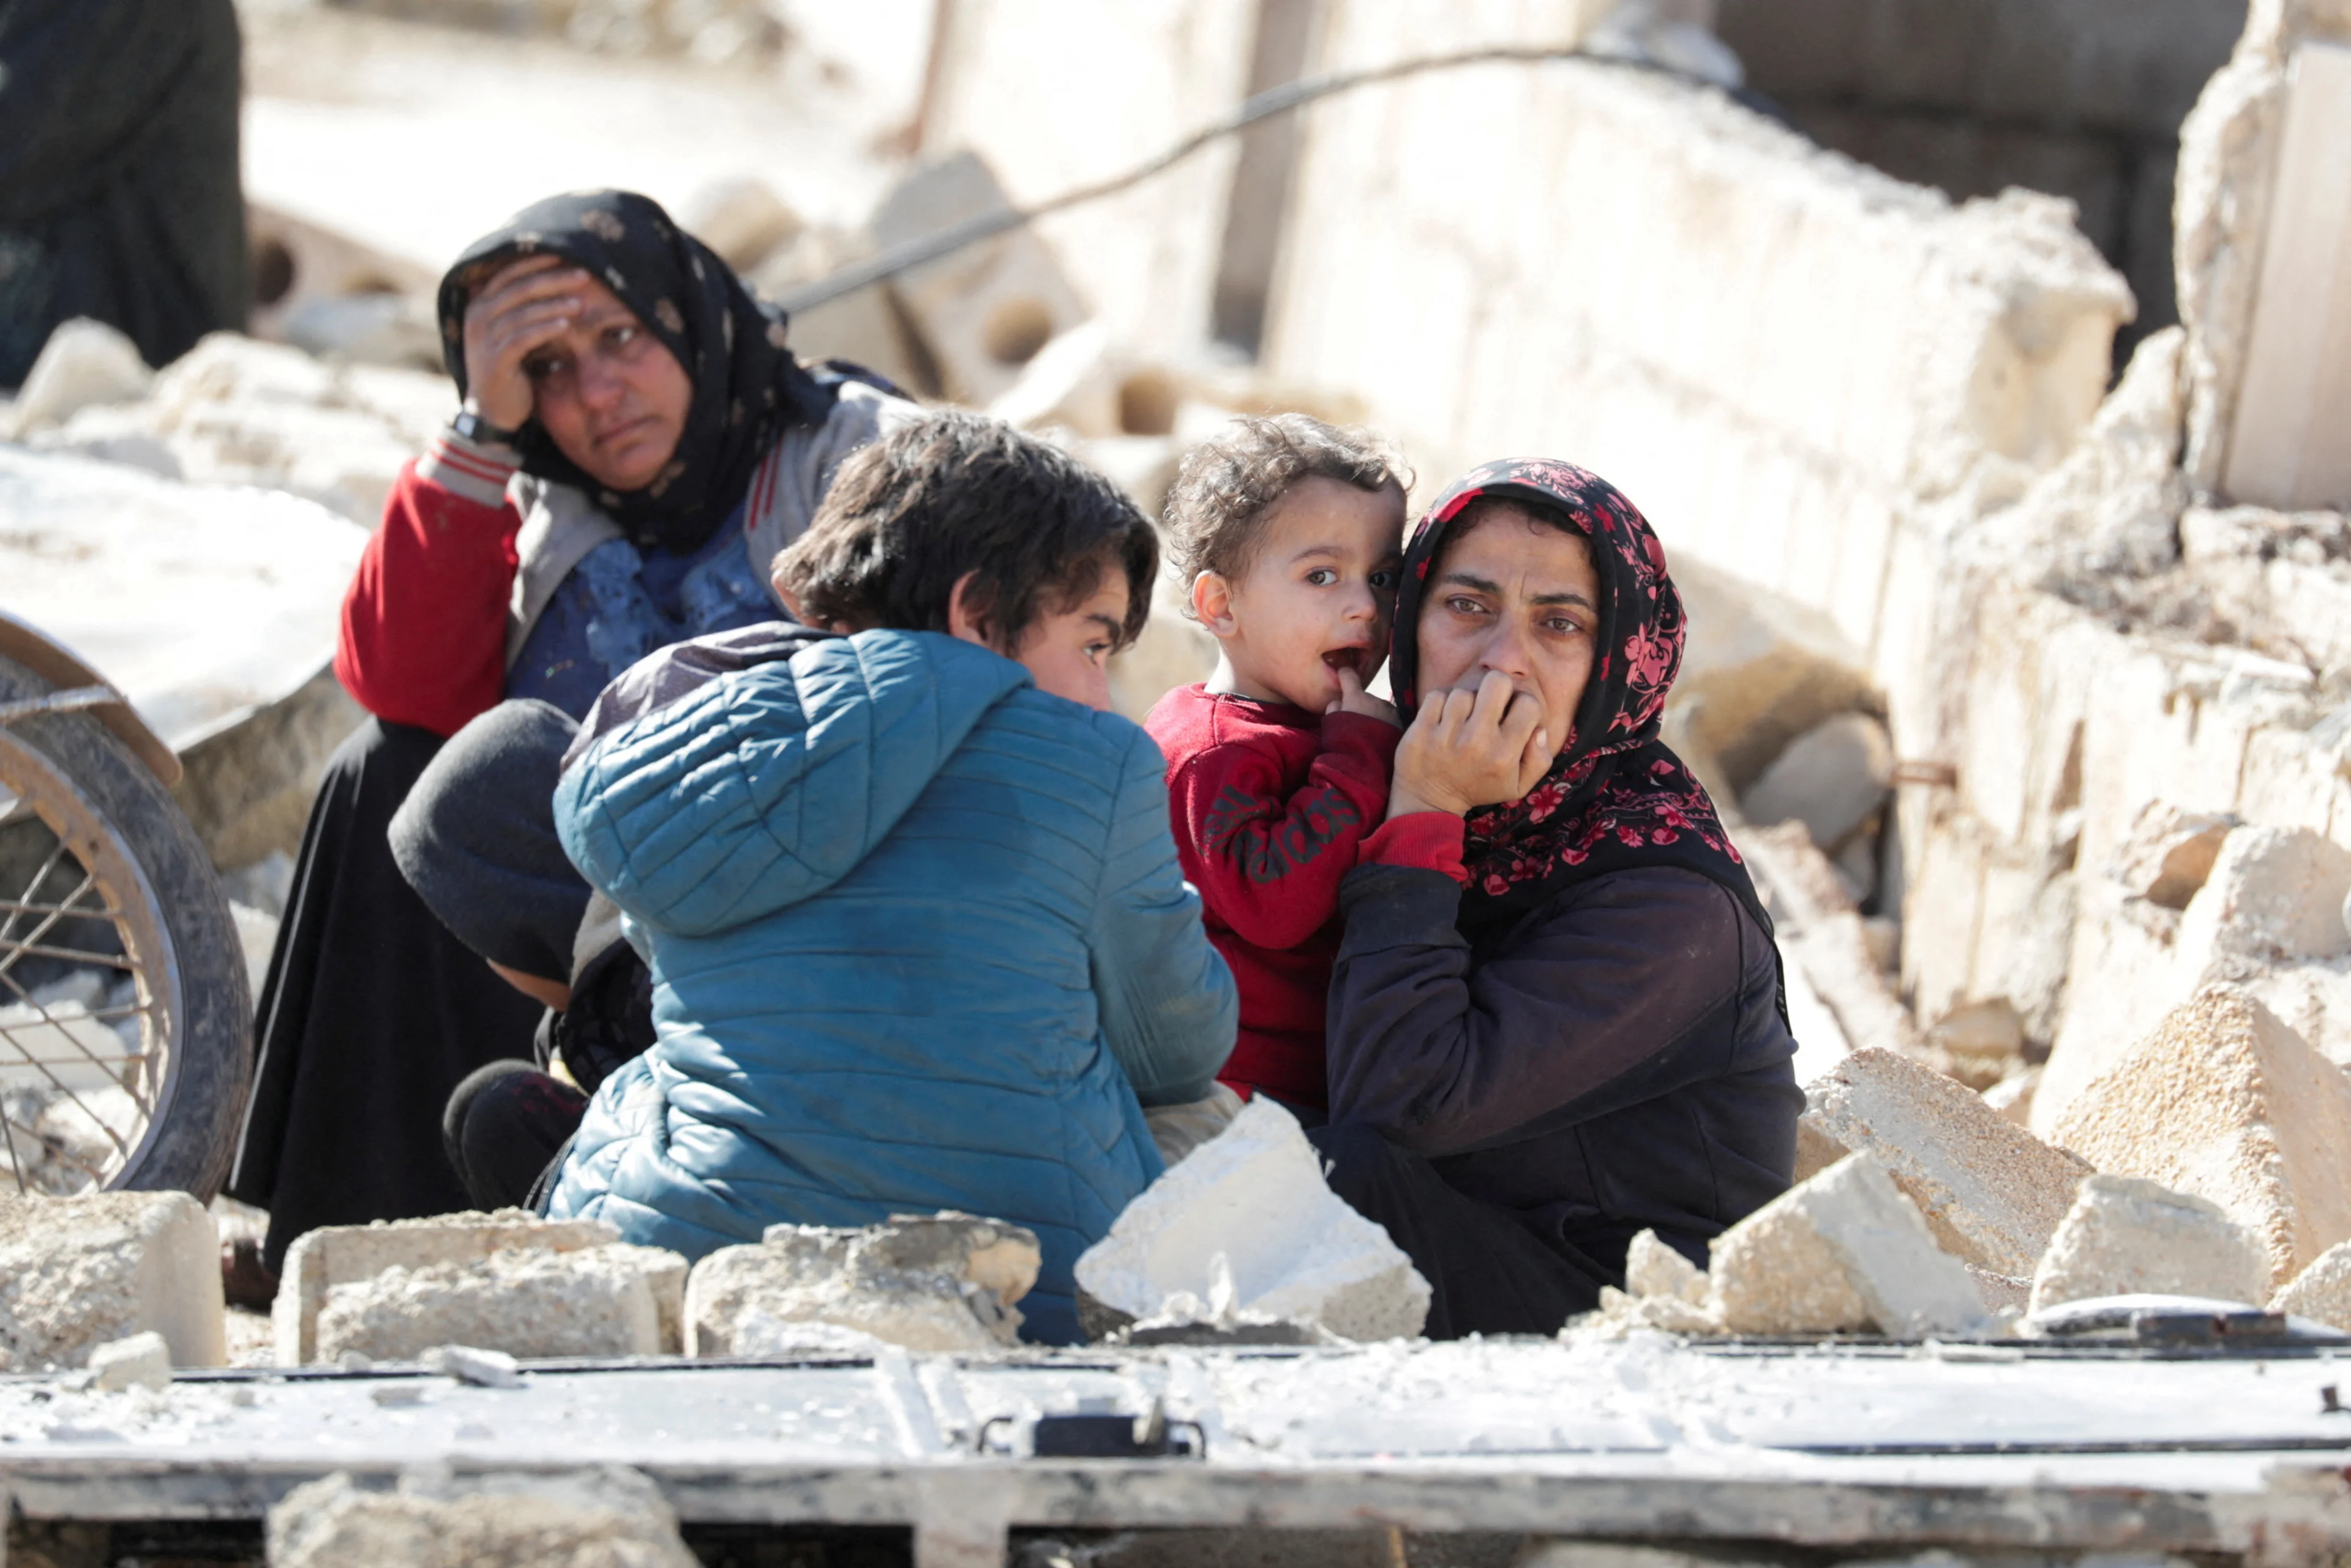 People sitting on the rubble react in the aftermath of an earthquake, in rebel-held town of Jandaris, Syria February 7, 2023. REUTERS/Khalil Ashawi